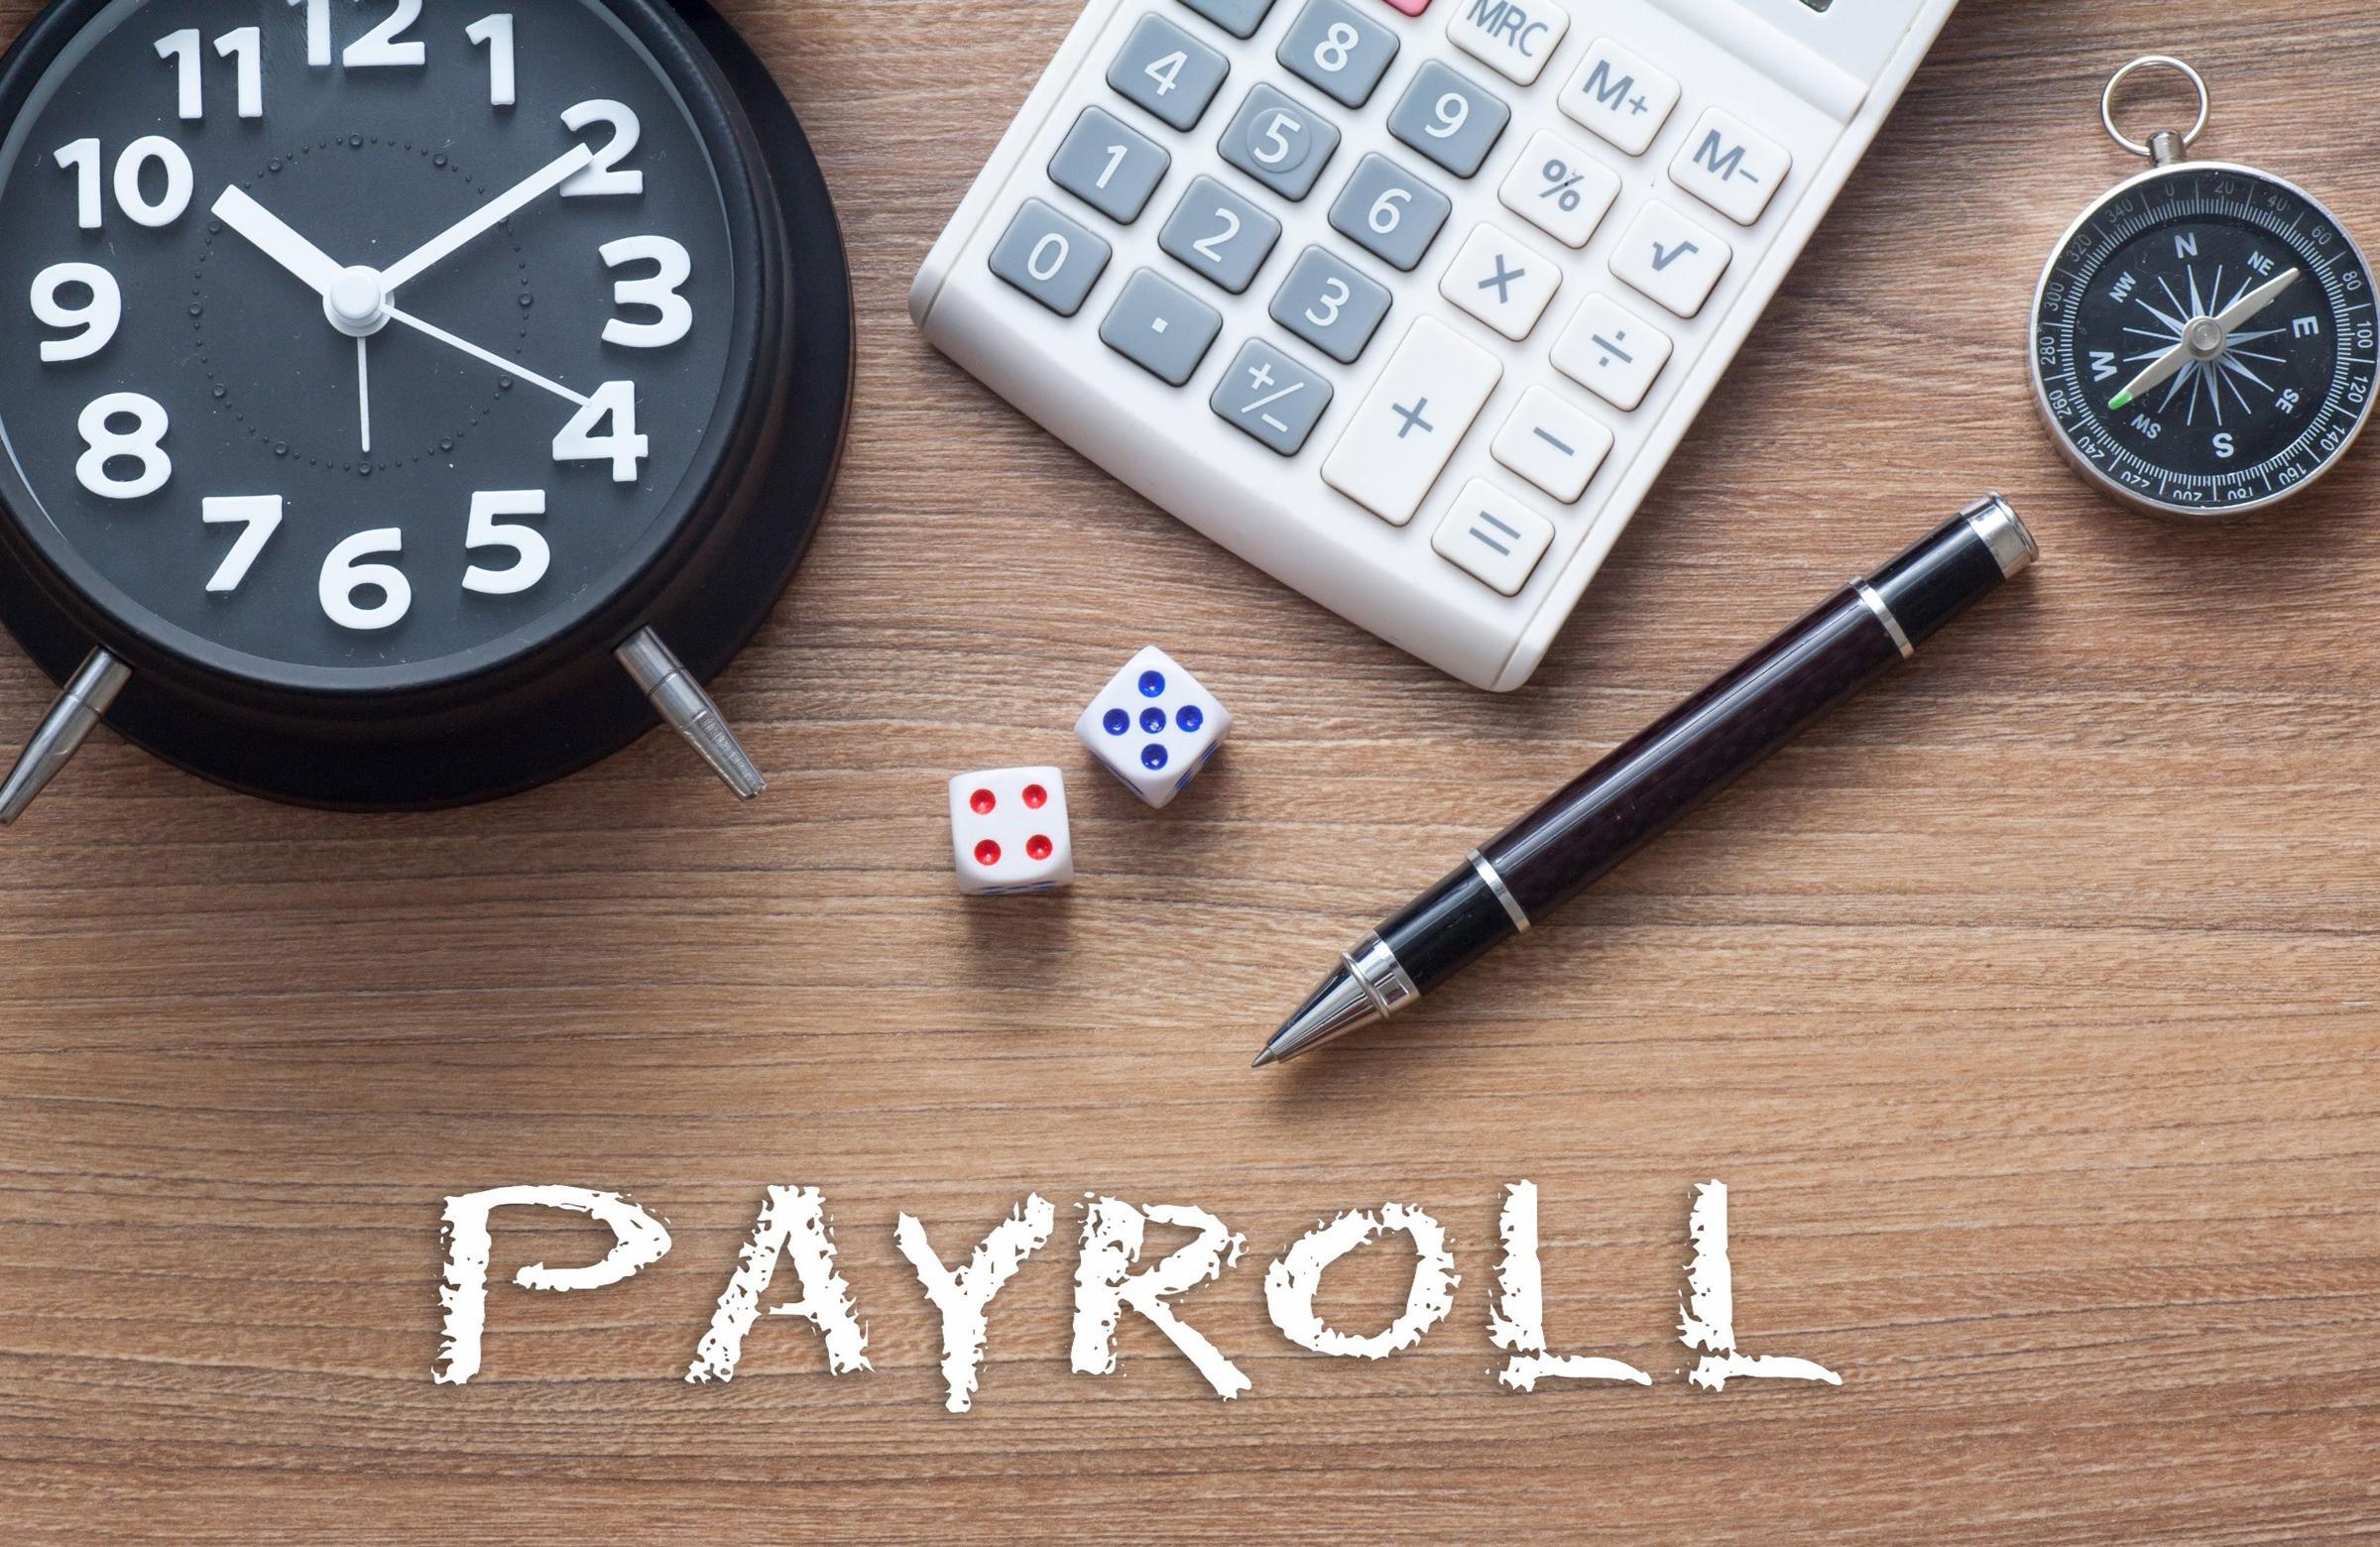 TRAINING PAYROLL ADMINISTRATION DESIGN AND MANAGEMENT